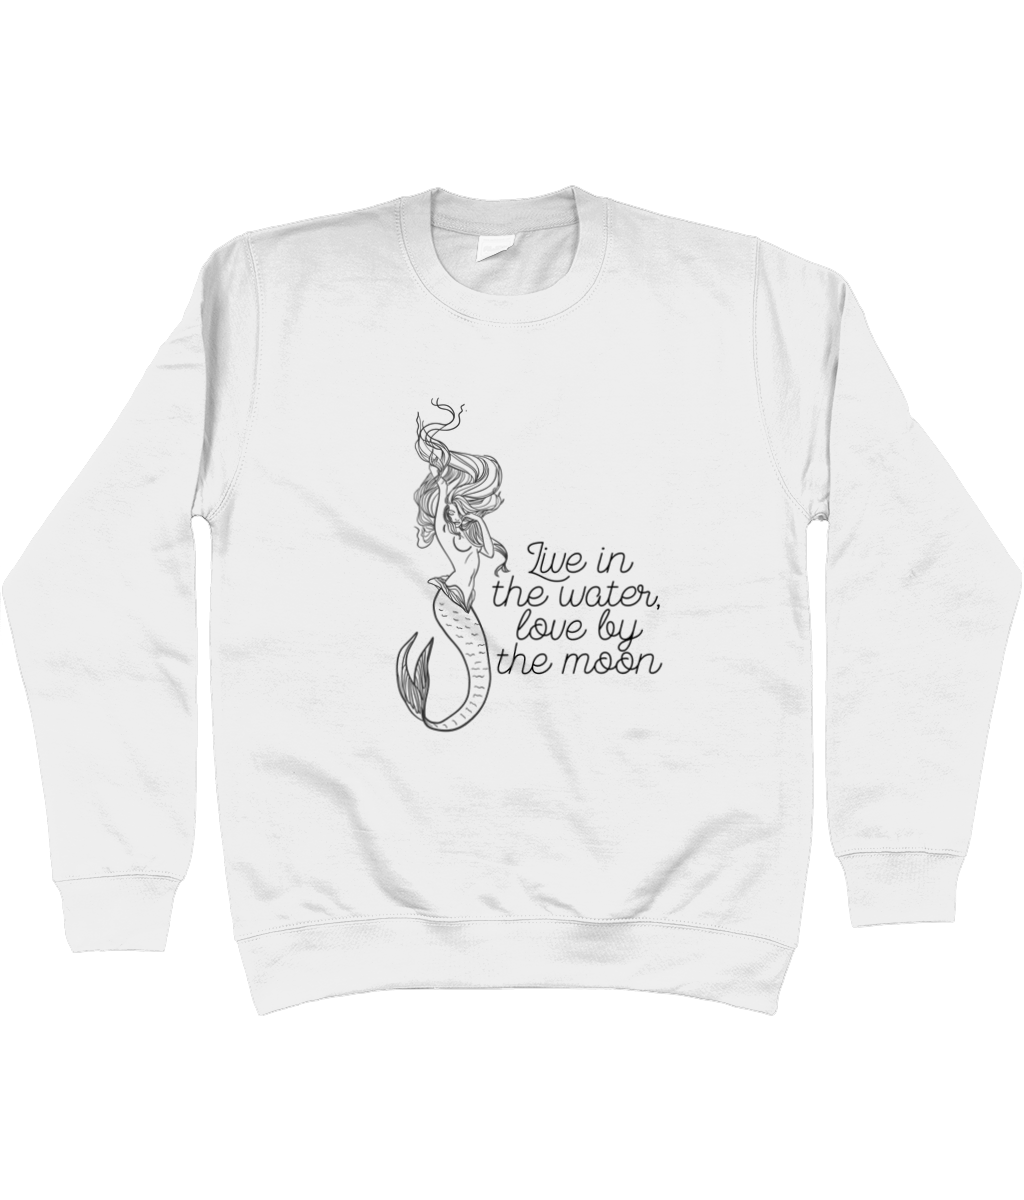 Unisex Sweatshirt Live in the water, love by the moon